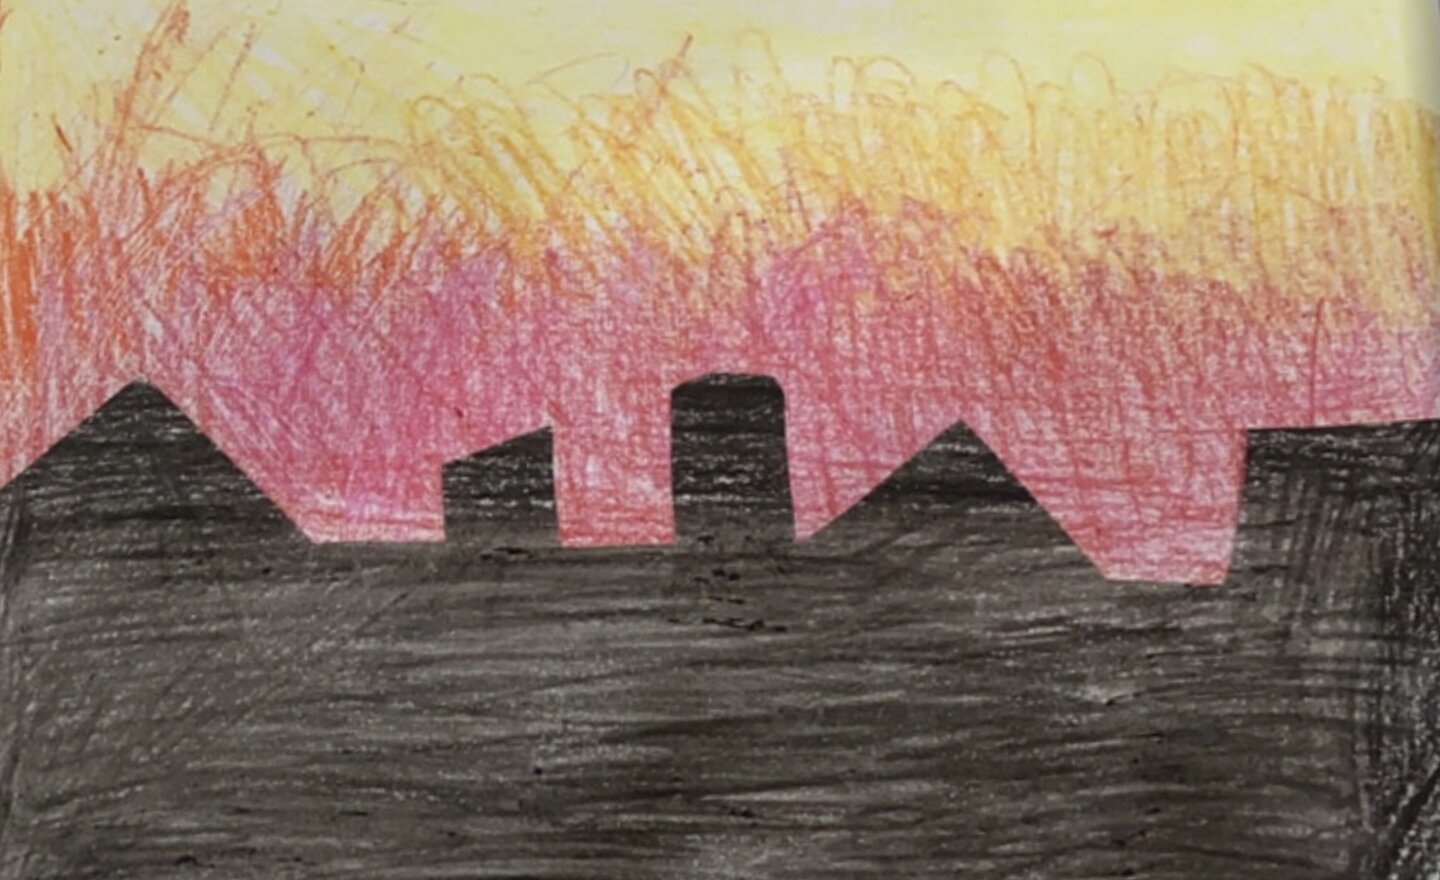 Image of Great Fire of London artwork